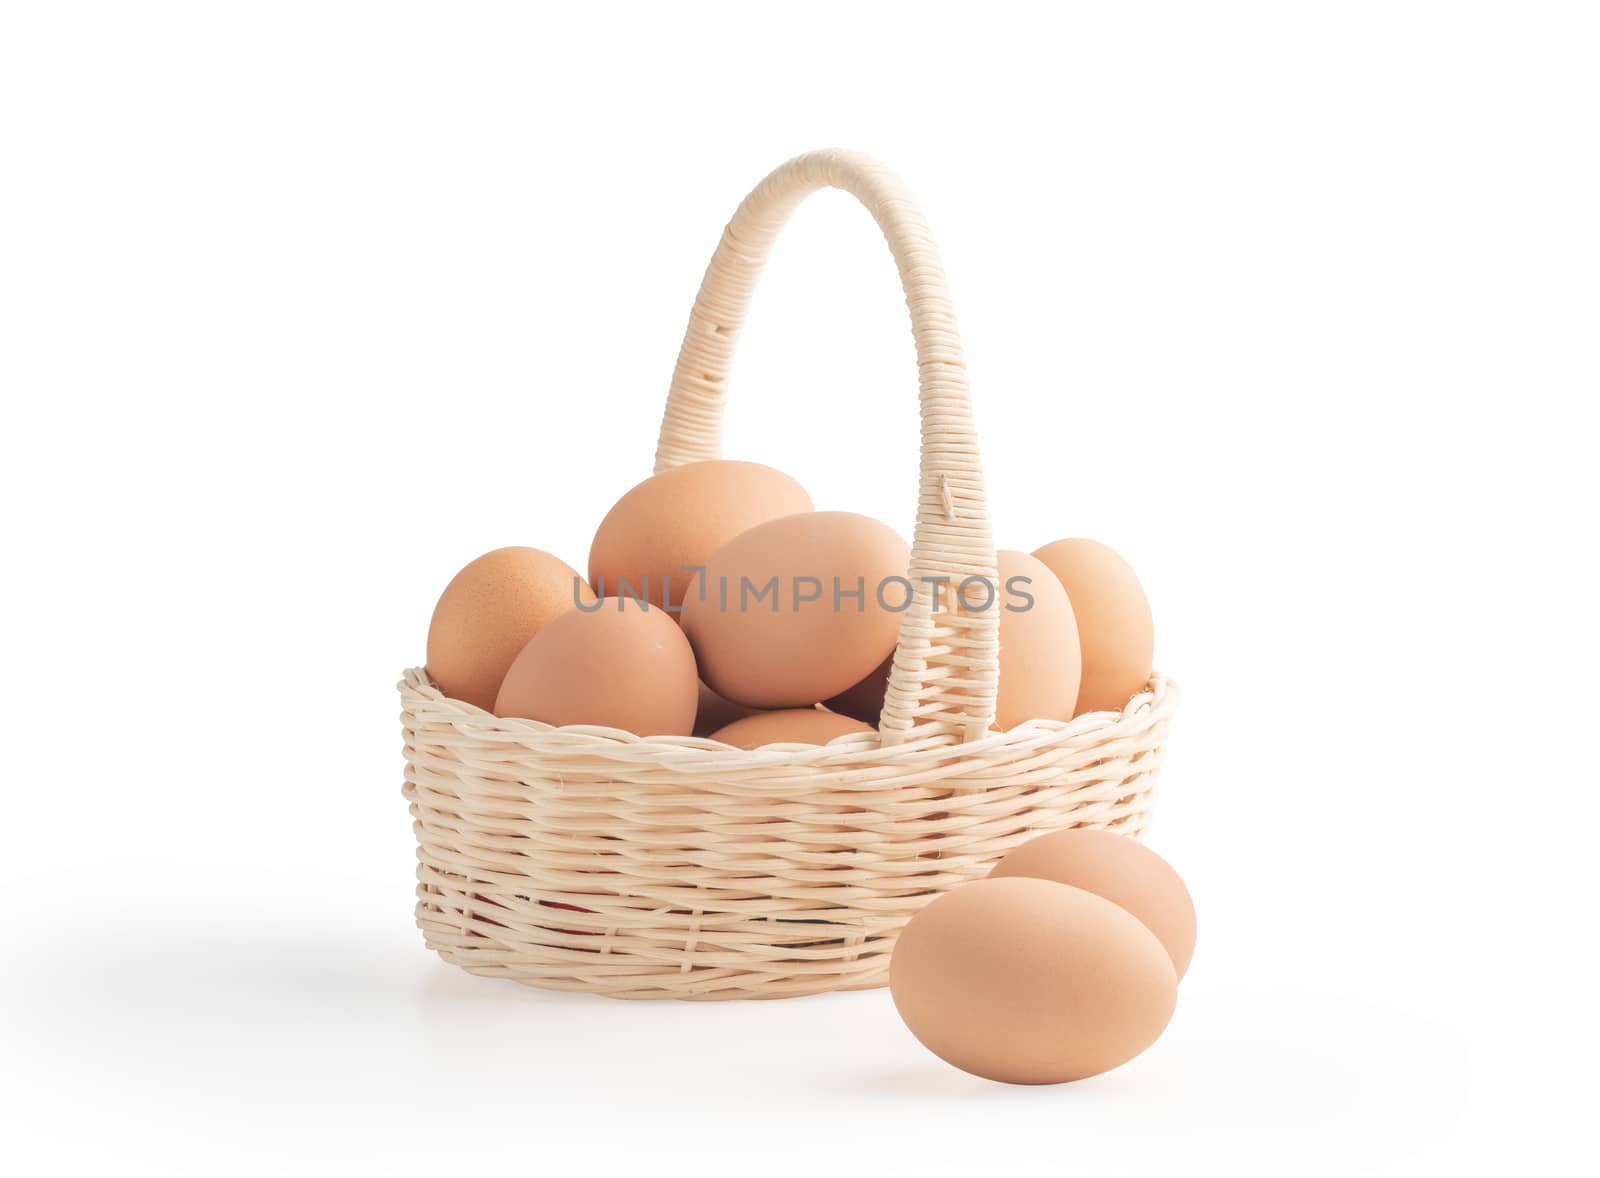 Eggs in the wicker basket isolated on the white backgrounds with clipping paths